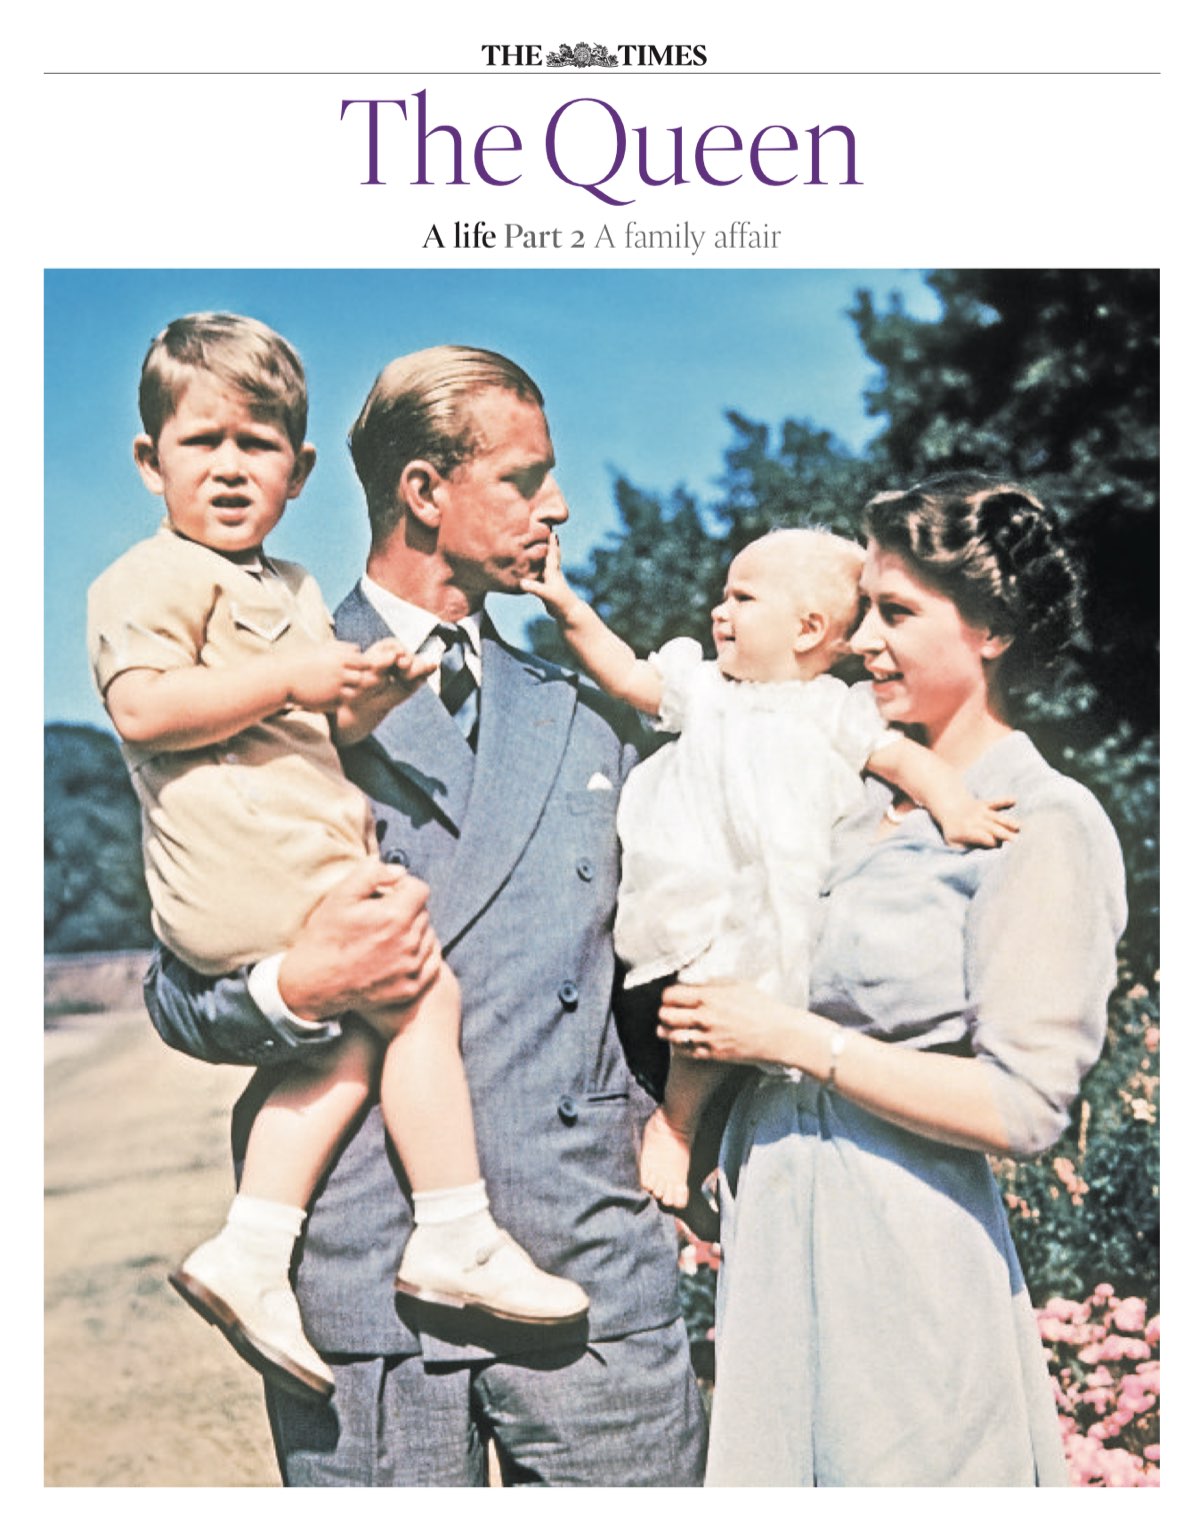 The Queen, A Life Part 2 - A Family Afffair [The Times, 12 Sep 2022]